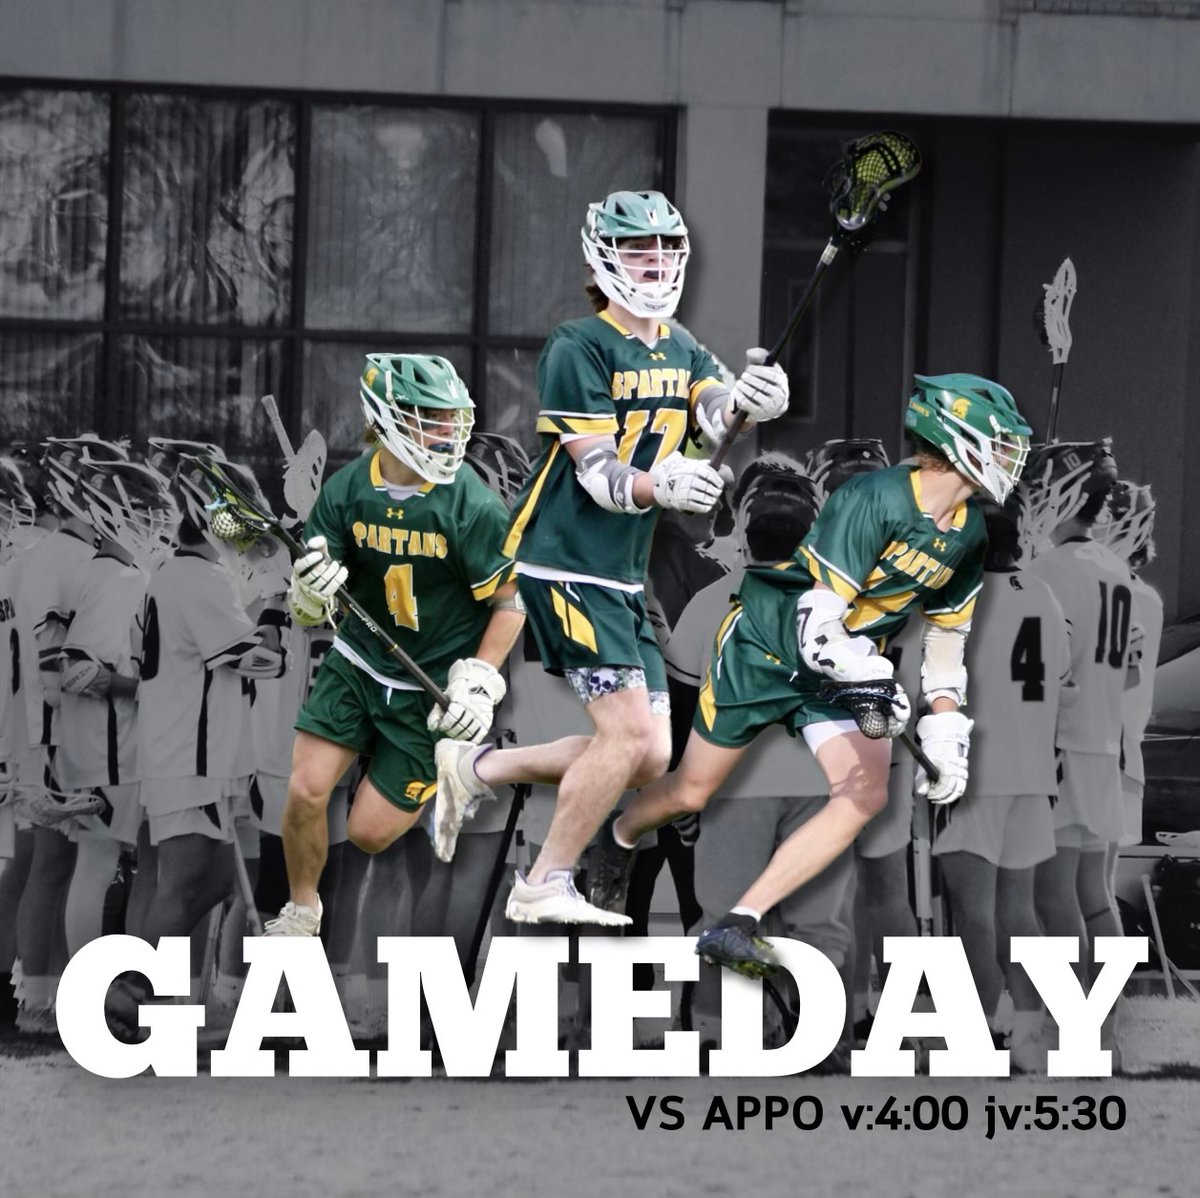 @SaintMarksHS Boys Lacrosse Team faces off against Appoquinimink HS at home today. Varsity starts at 4:00, JV will follow. Come show your support. #saintmarkshs #saintmarkslacrosse